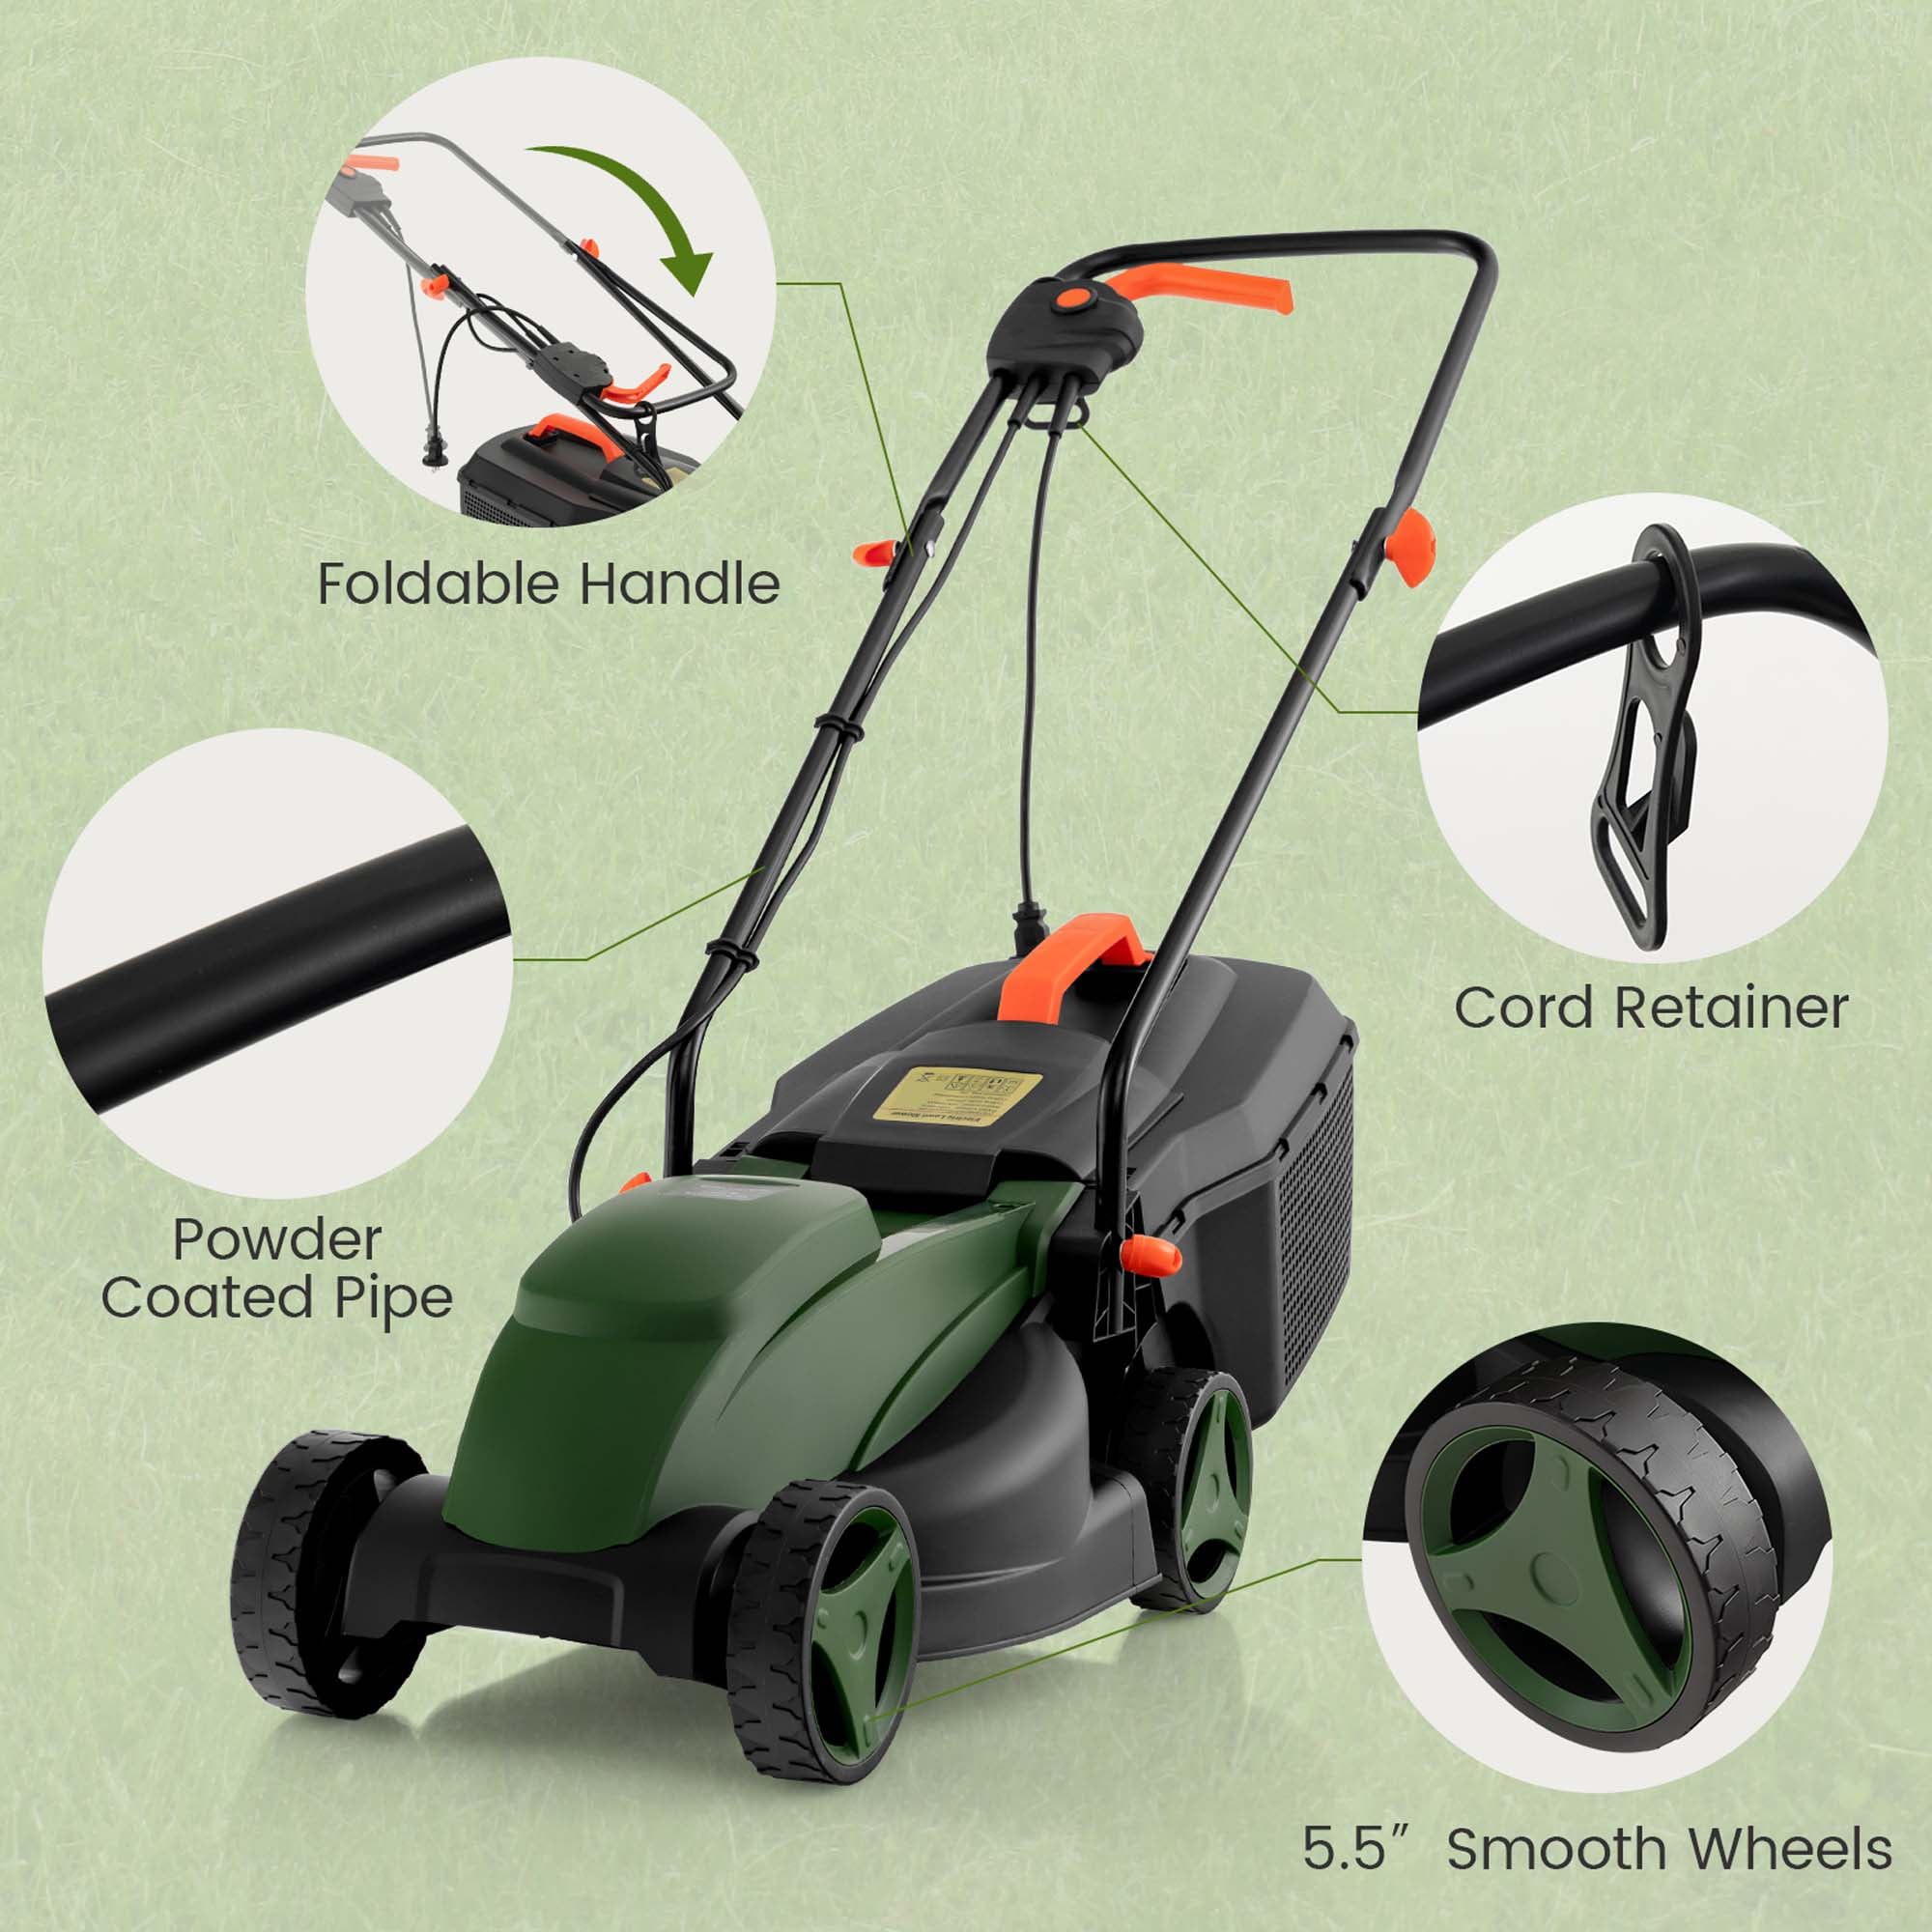 Costway 12 Amp 14-Inch Electric Push Lawn Corded Mower With Grass Bag - Bed  Bath & Beyond - 21248862